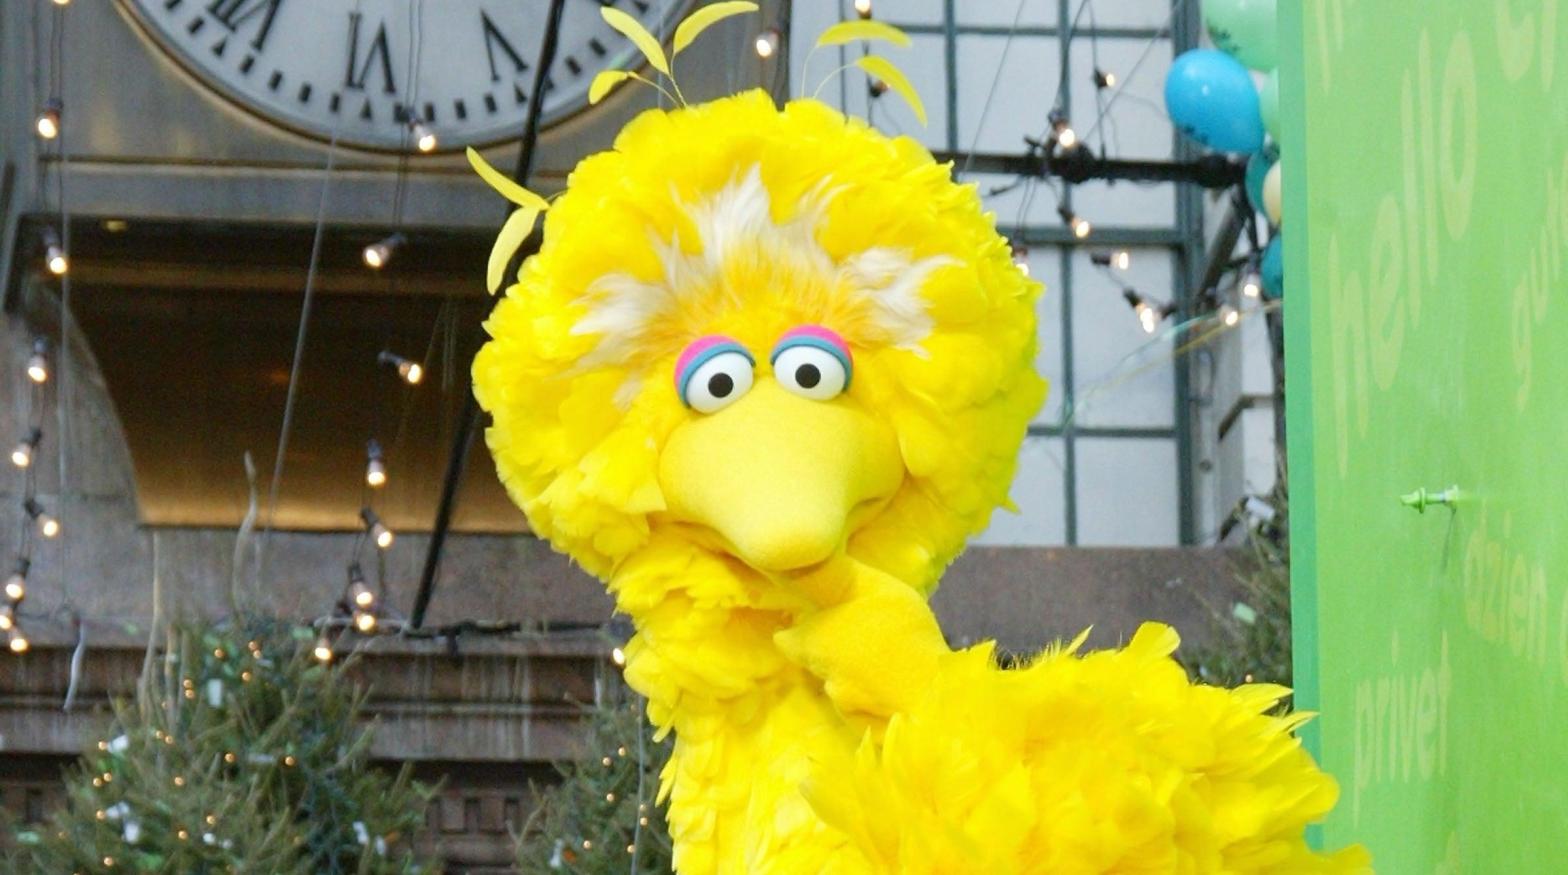 Big Bird at the 76th Annual Macy's Thanksgiving Day Parade in Herald Square, New York, in November 2002. (Photo: Matthew Peyton, Getty Images)